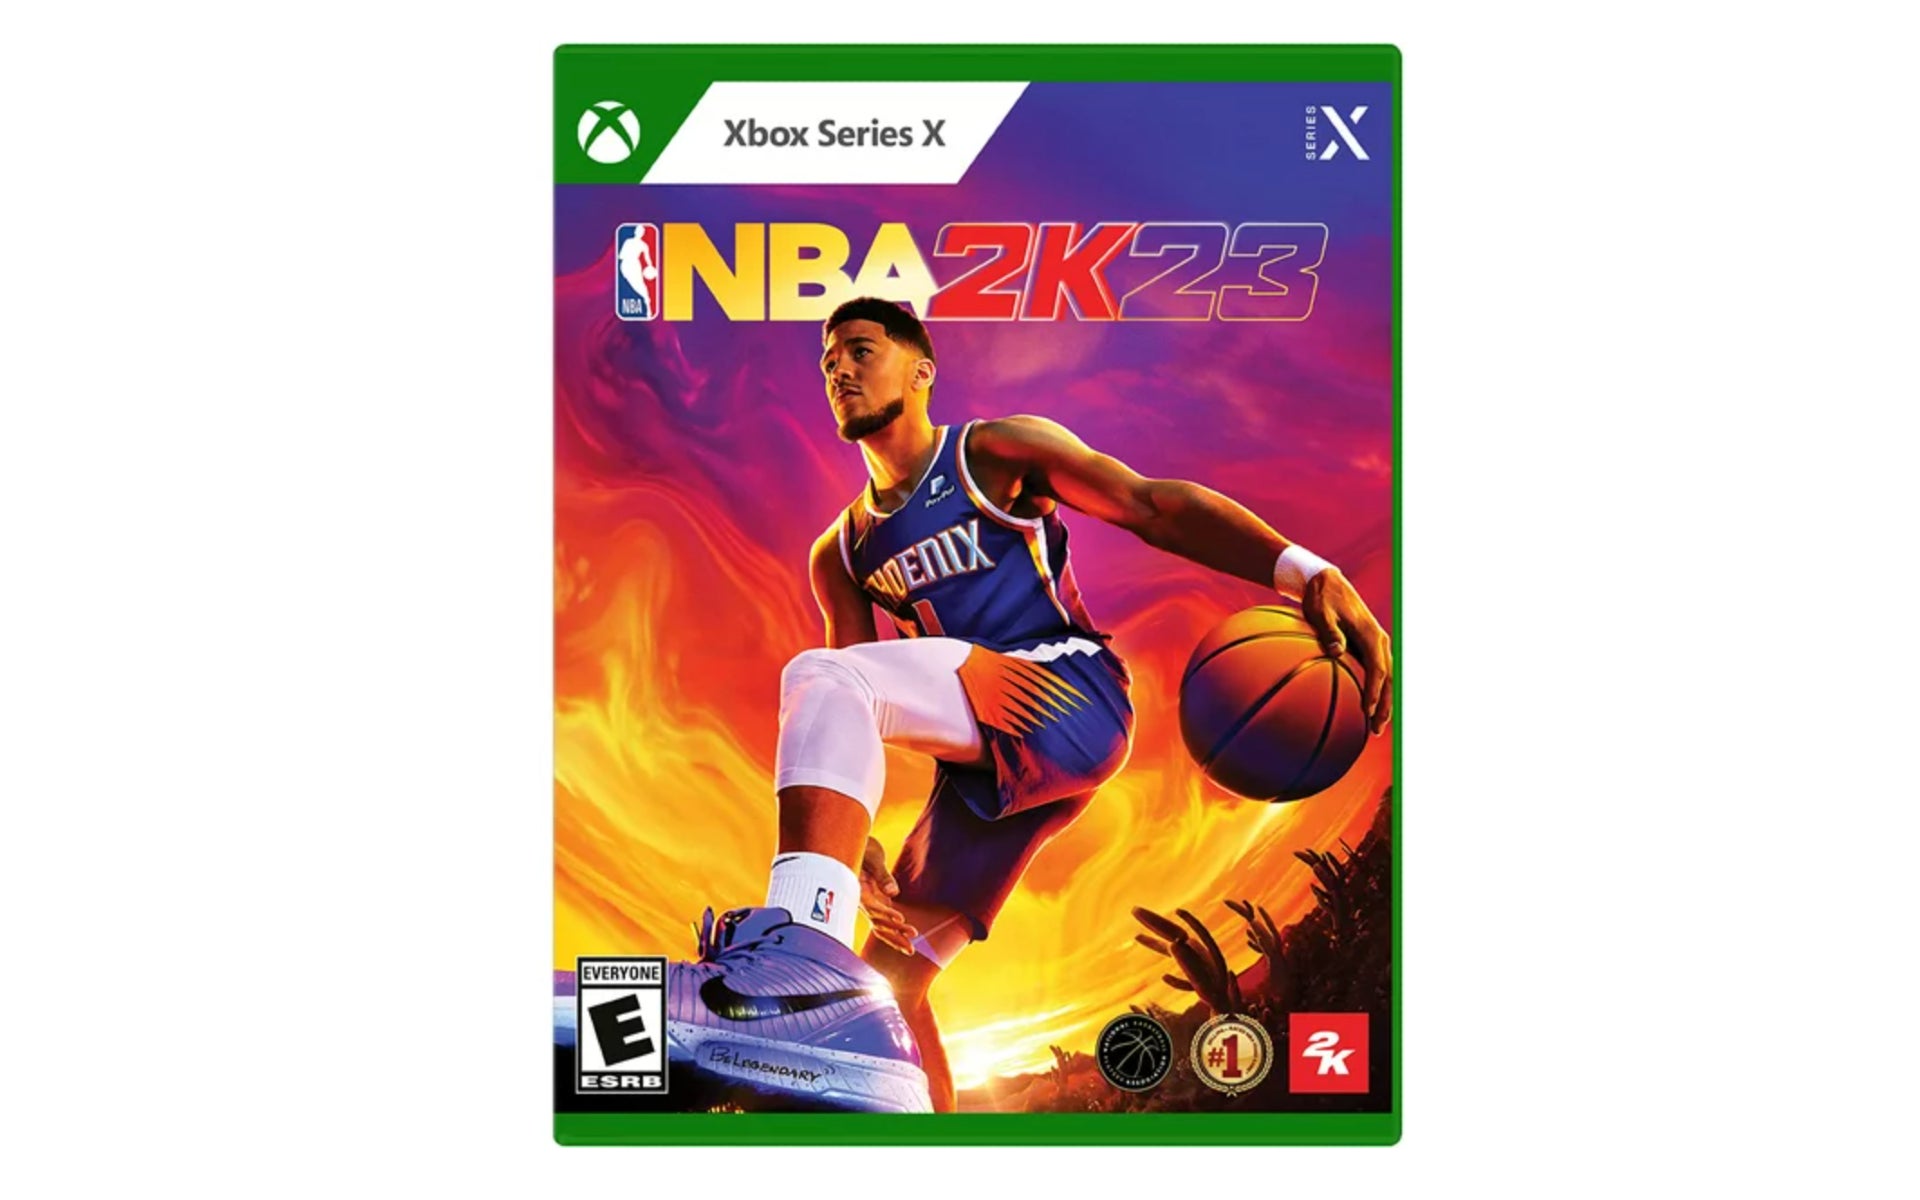 "NBA 2K23" for Xbox